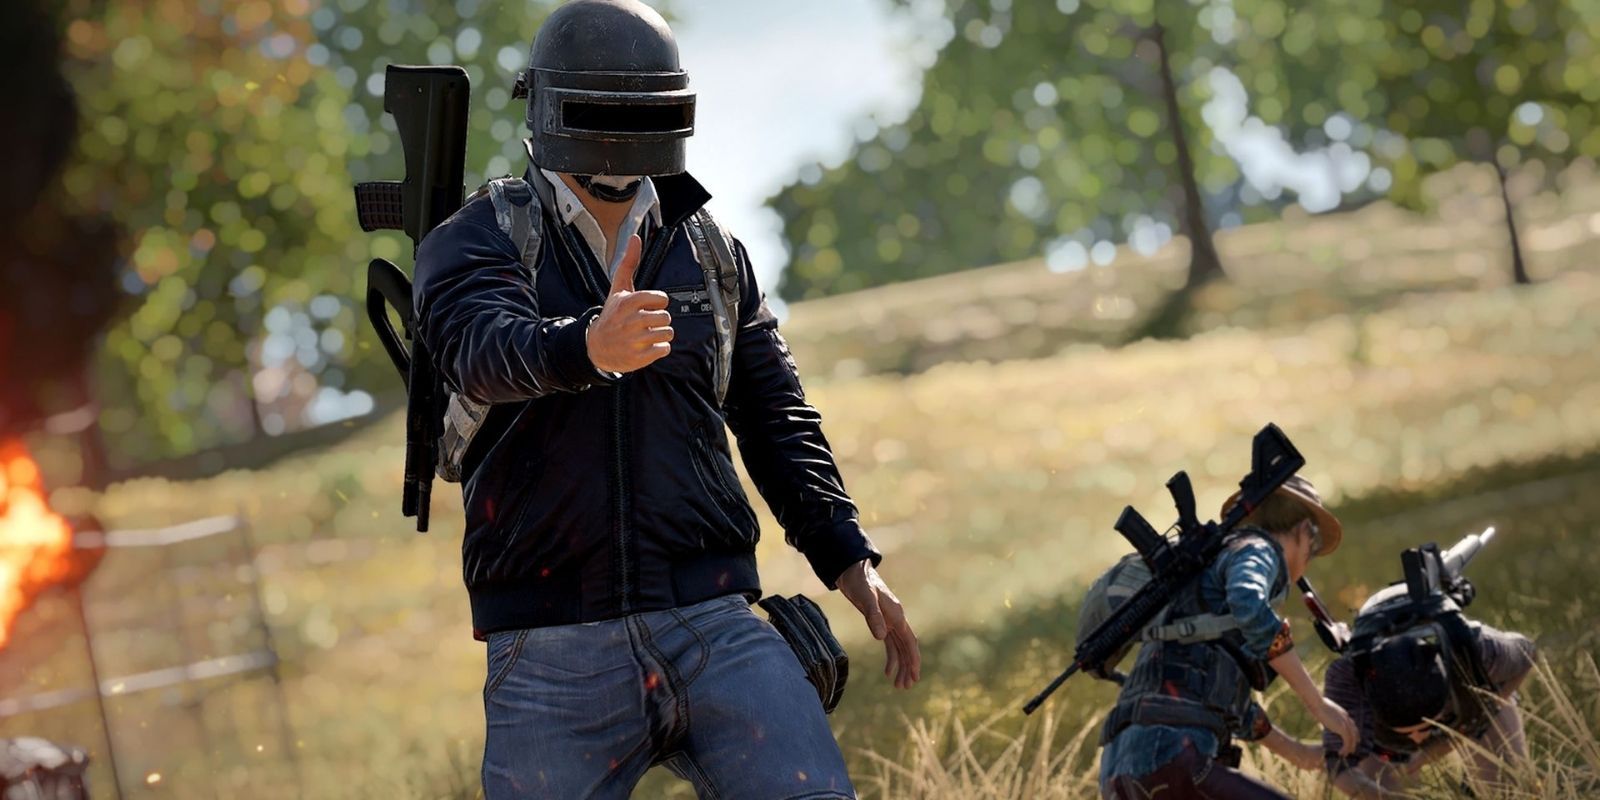 A PUBG player throws up finger guns while their team is revived in the background